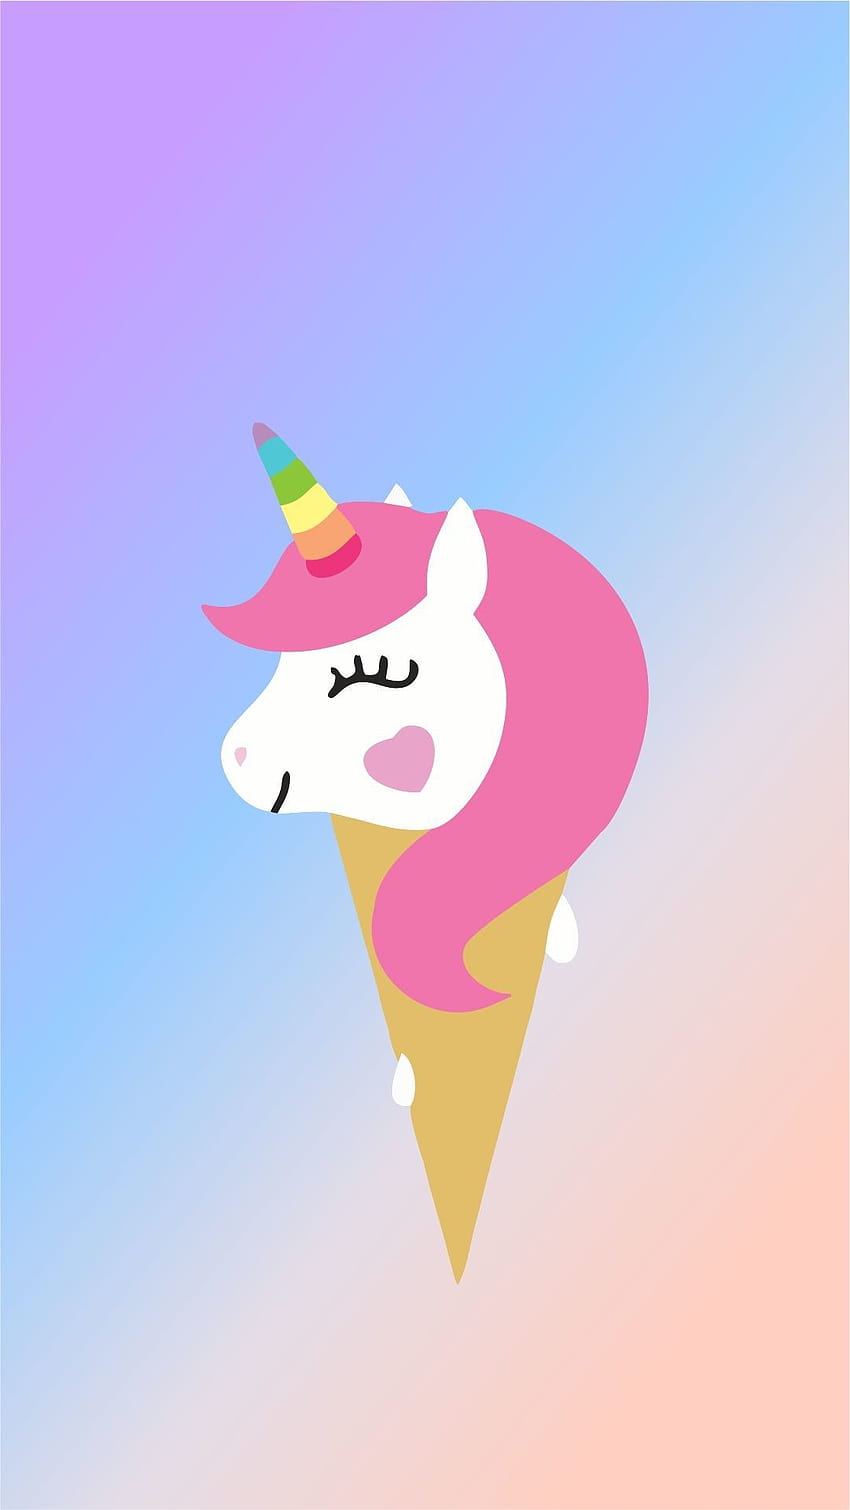 Unicorn ipad, ipad 2, ipad mini for parallax wallpapers hd, desktop  backgrounds 1280x1280, images and pictures